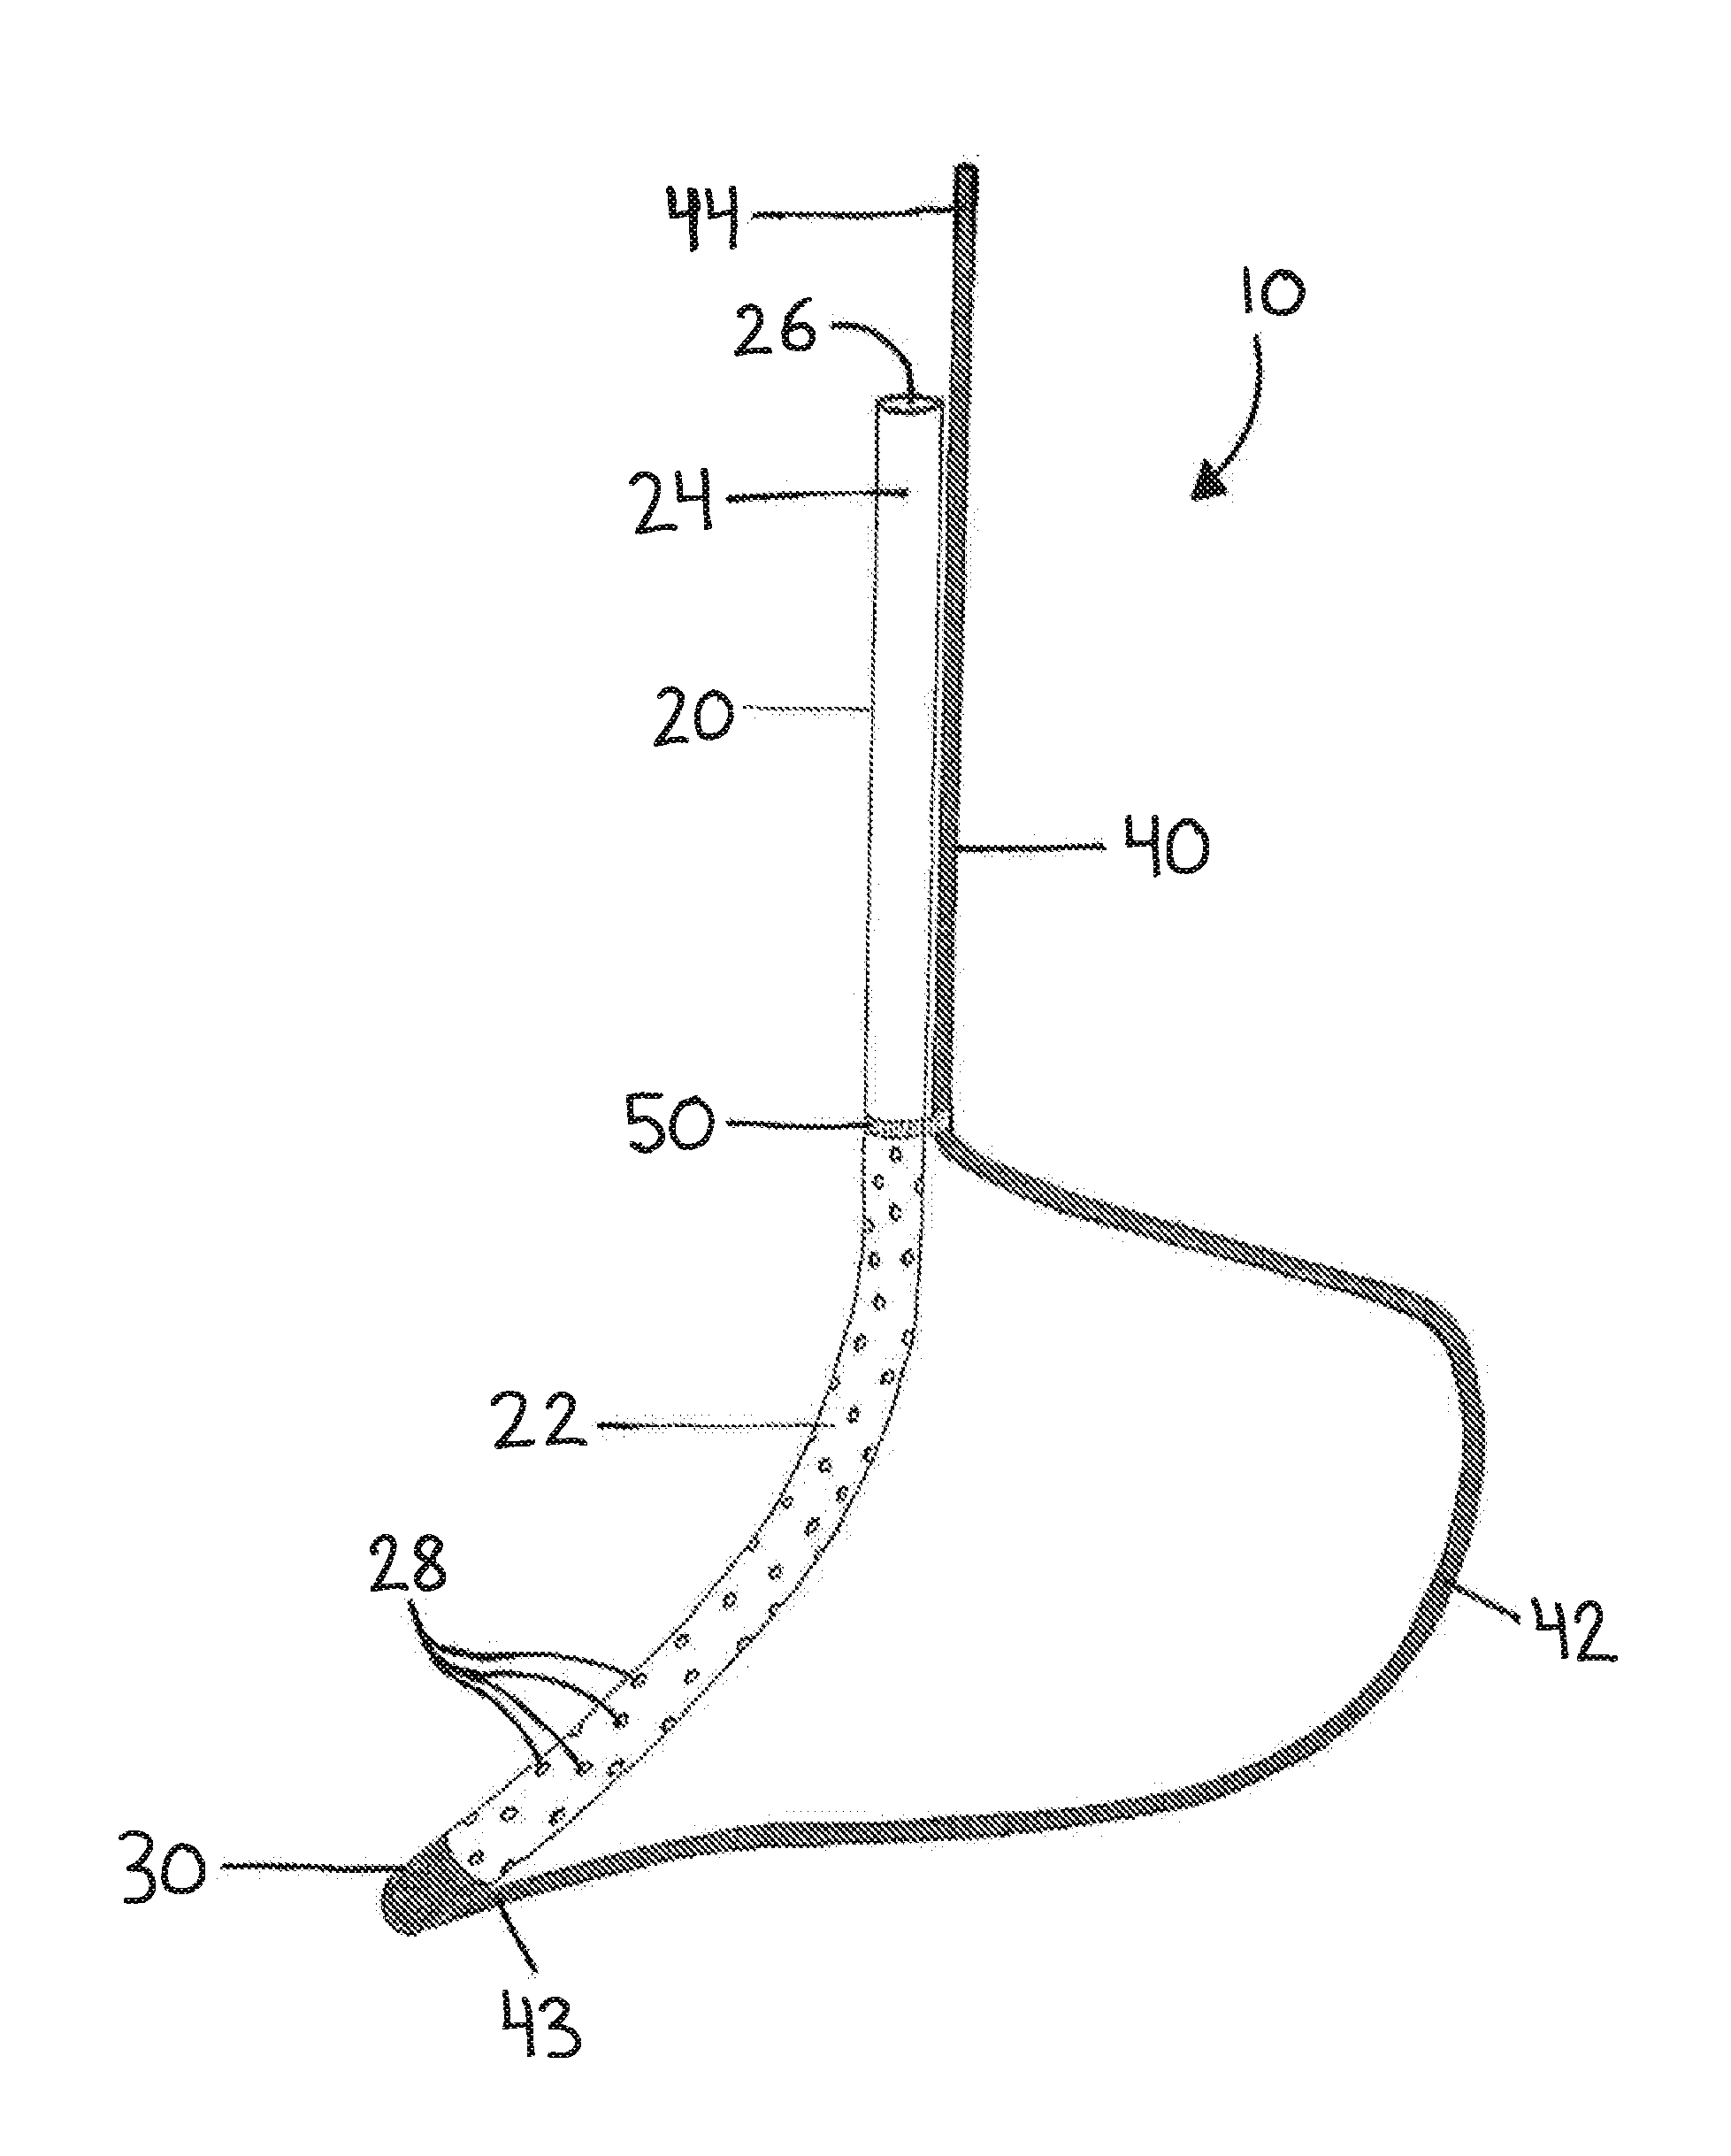 Devices and methods facilitating sleeve gastrectomy procedures